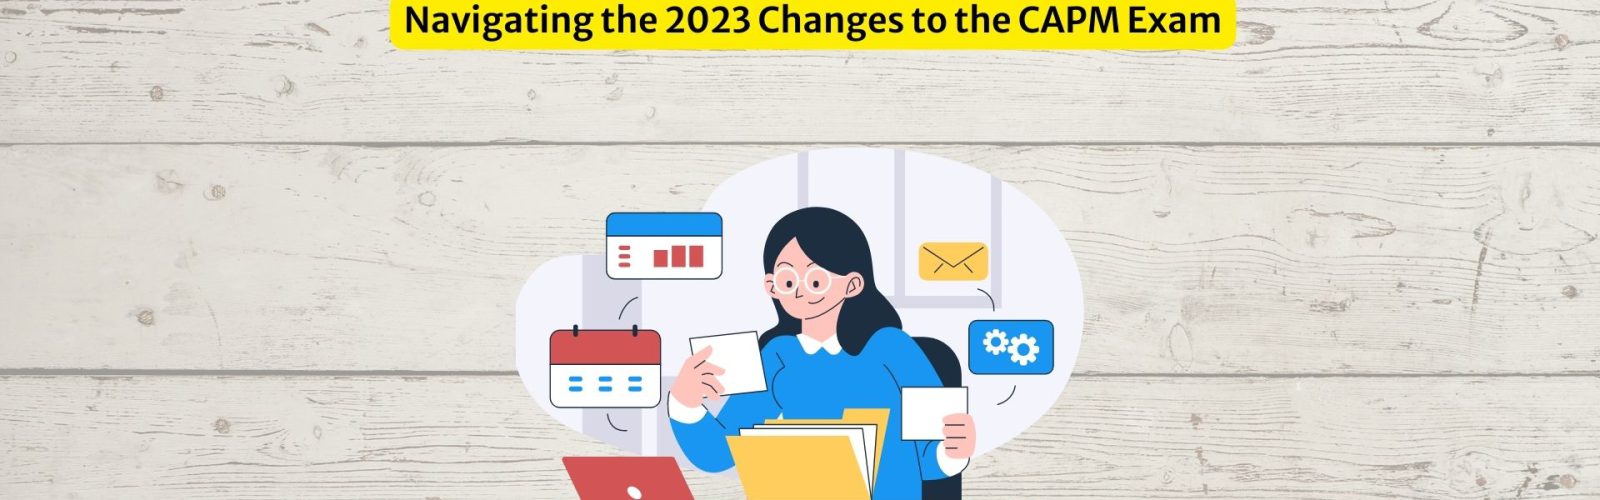 Navigating the 2023 Changes to the CAPM Exam